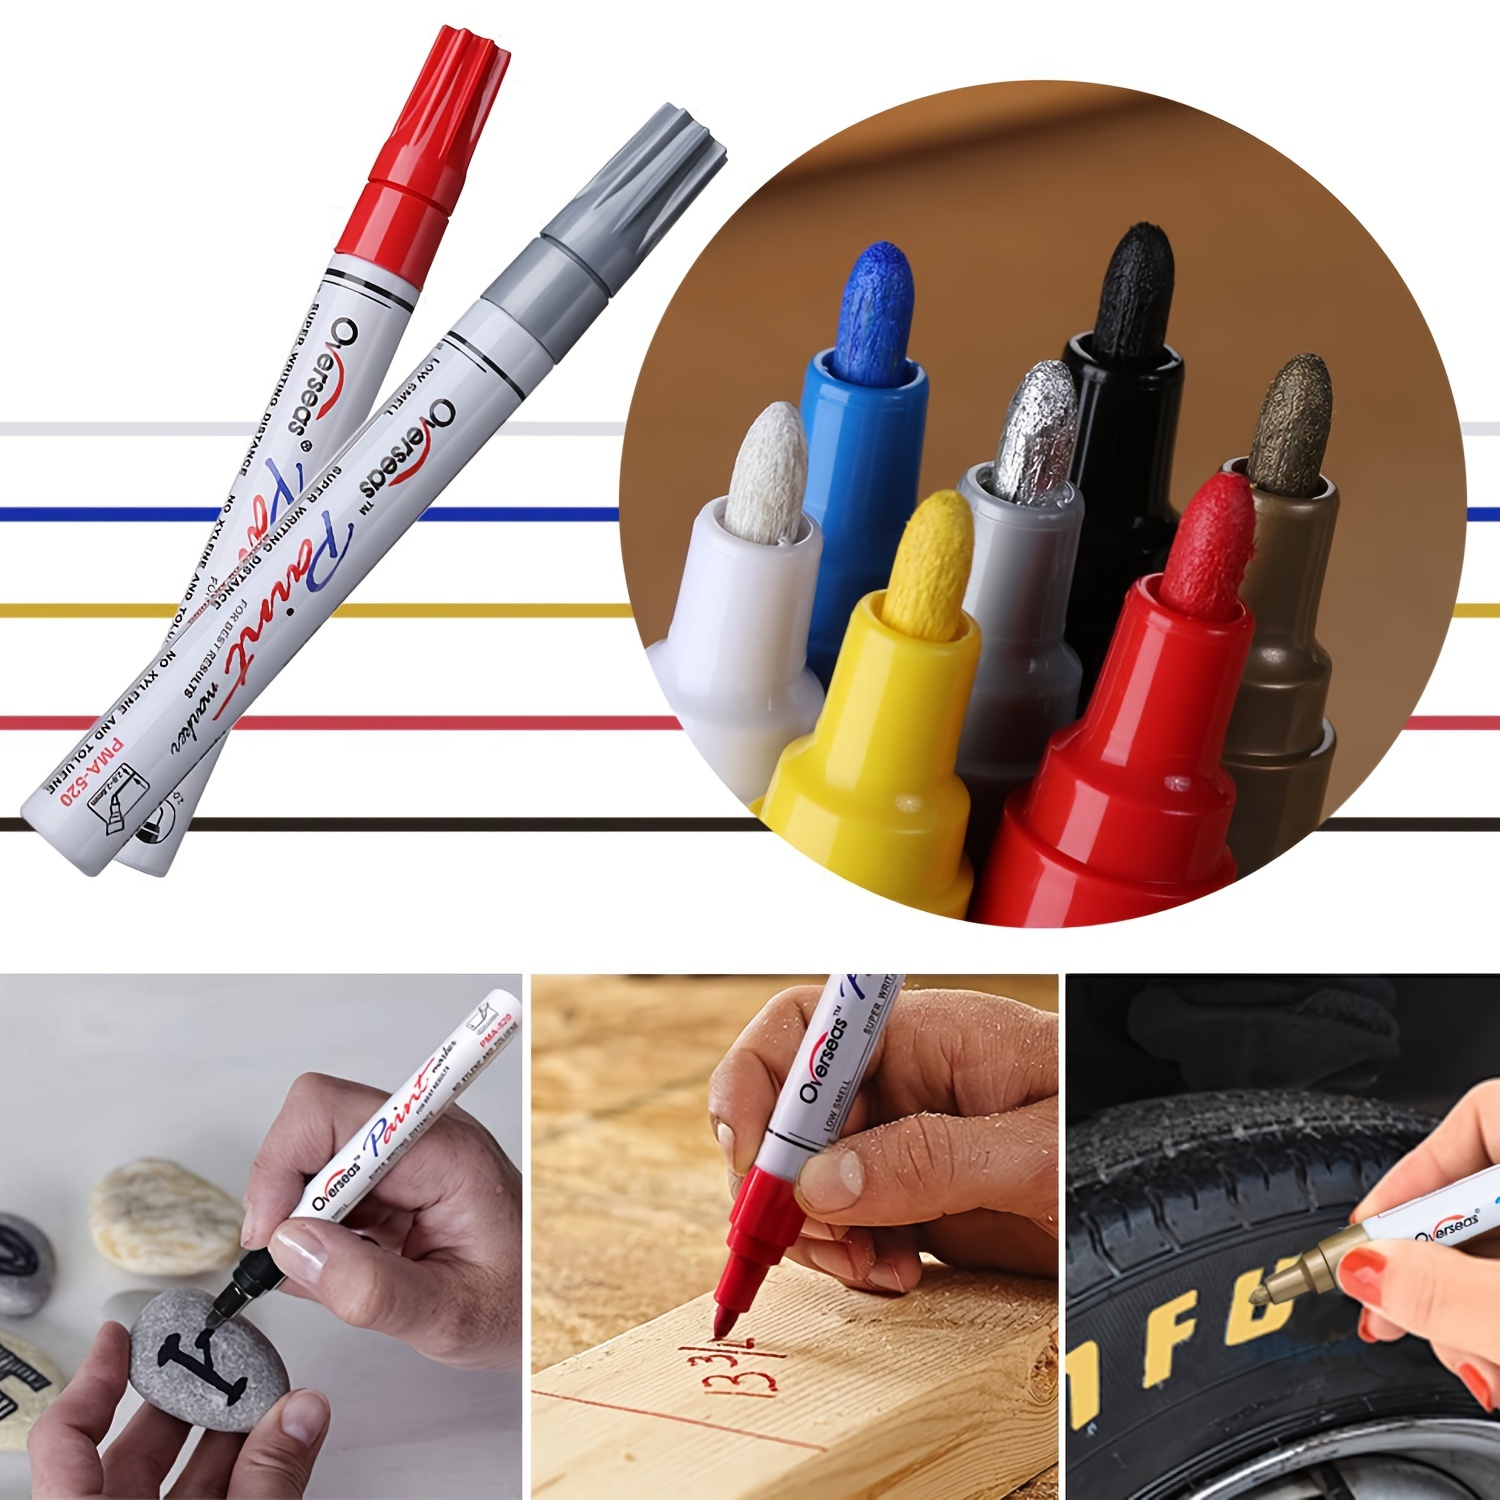 Overseas Paint Markers Pens, Painting Marker on Almost Anything Quick Dry  and Permanent, Oil-Based Paint-Marker Pen Set for Rocks, Wood, Fabric